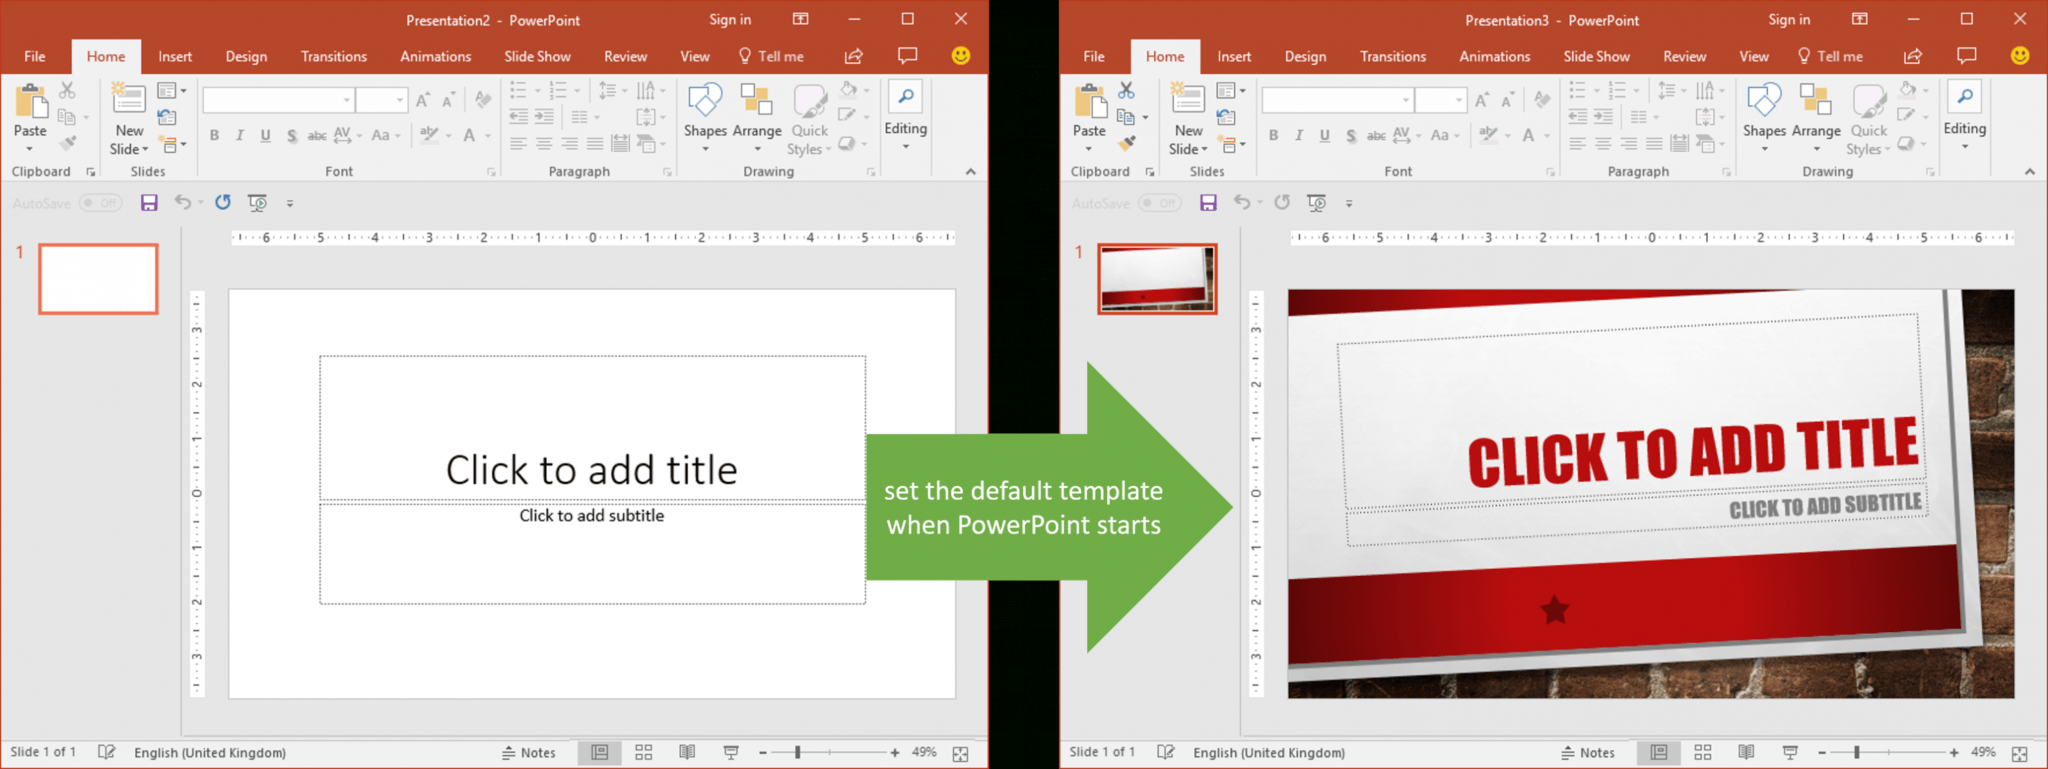 powerpoint default template office 365 Great Professional Template Design